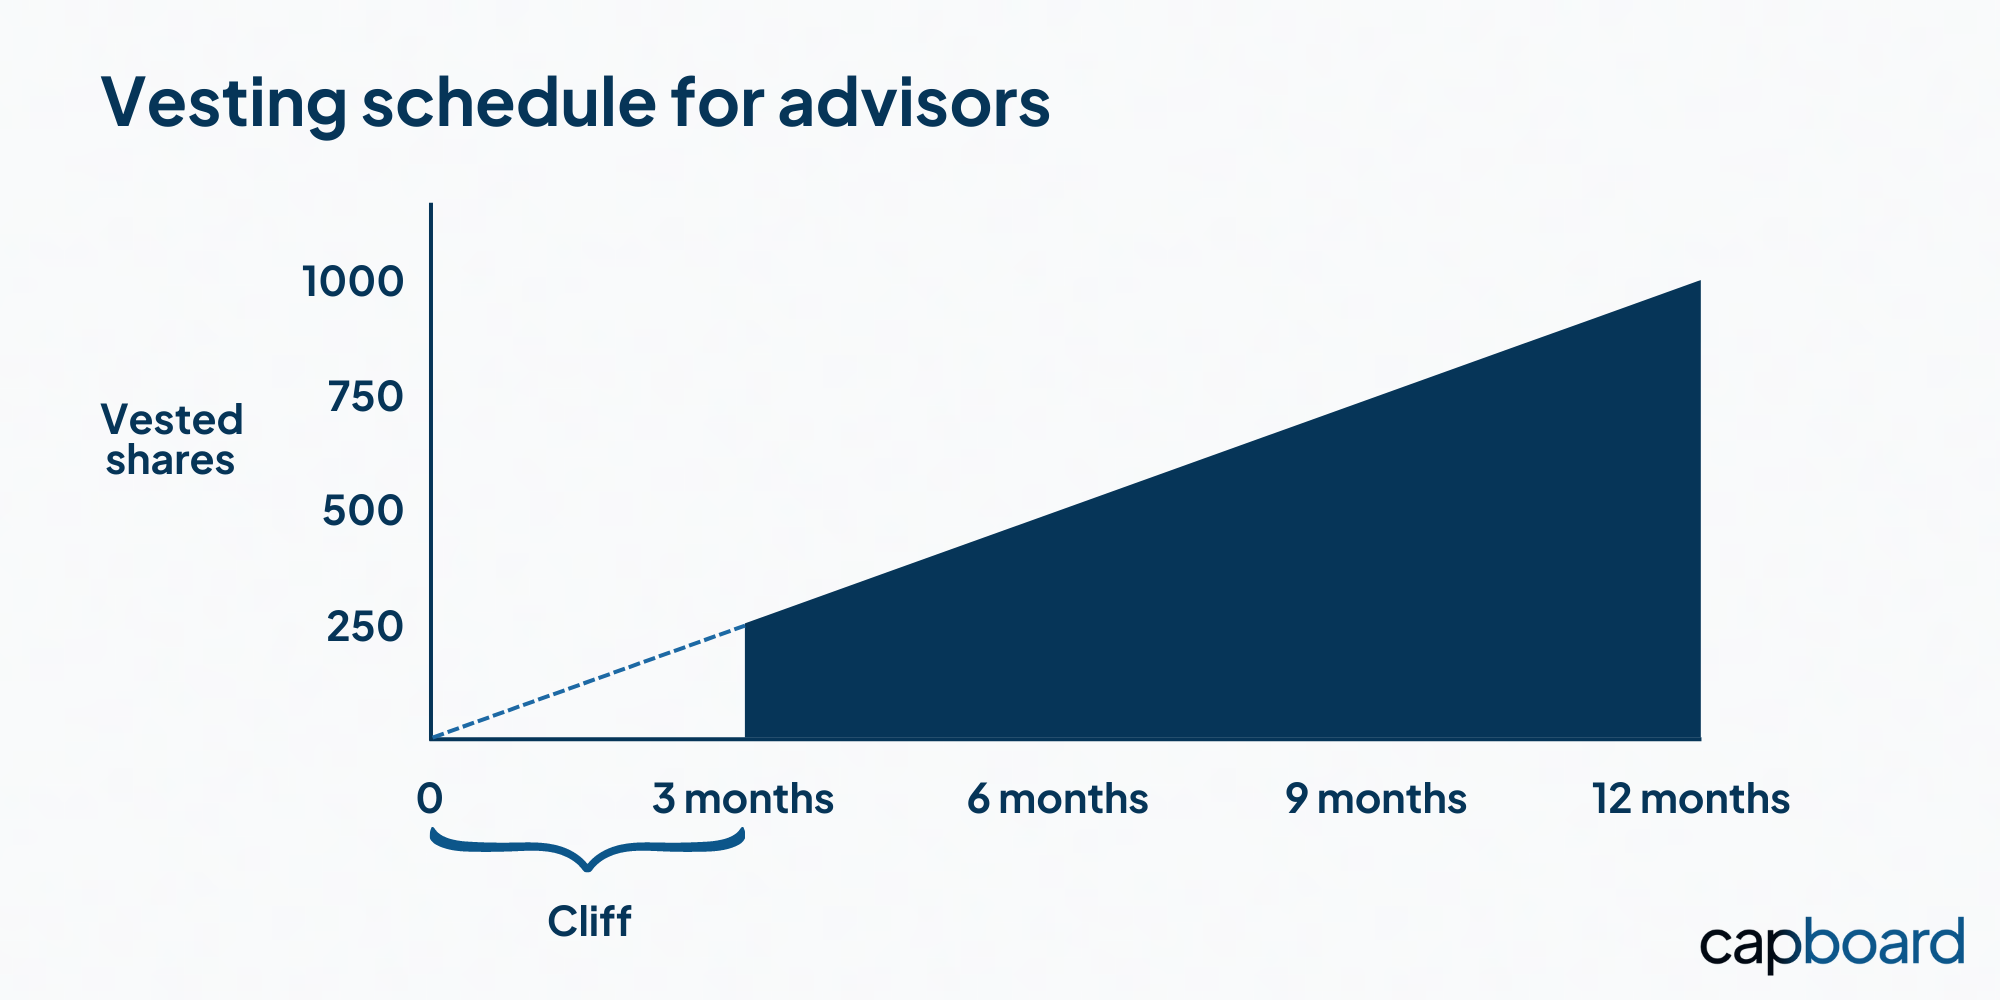 How a typical vesting schedule for advisors look like: a short or no cliff and a vesting period of 1 to 2 years. 